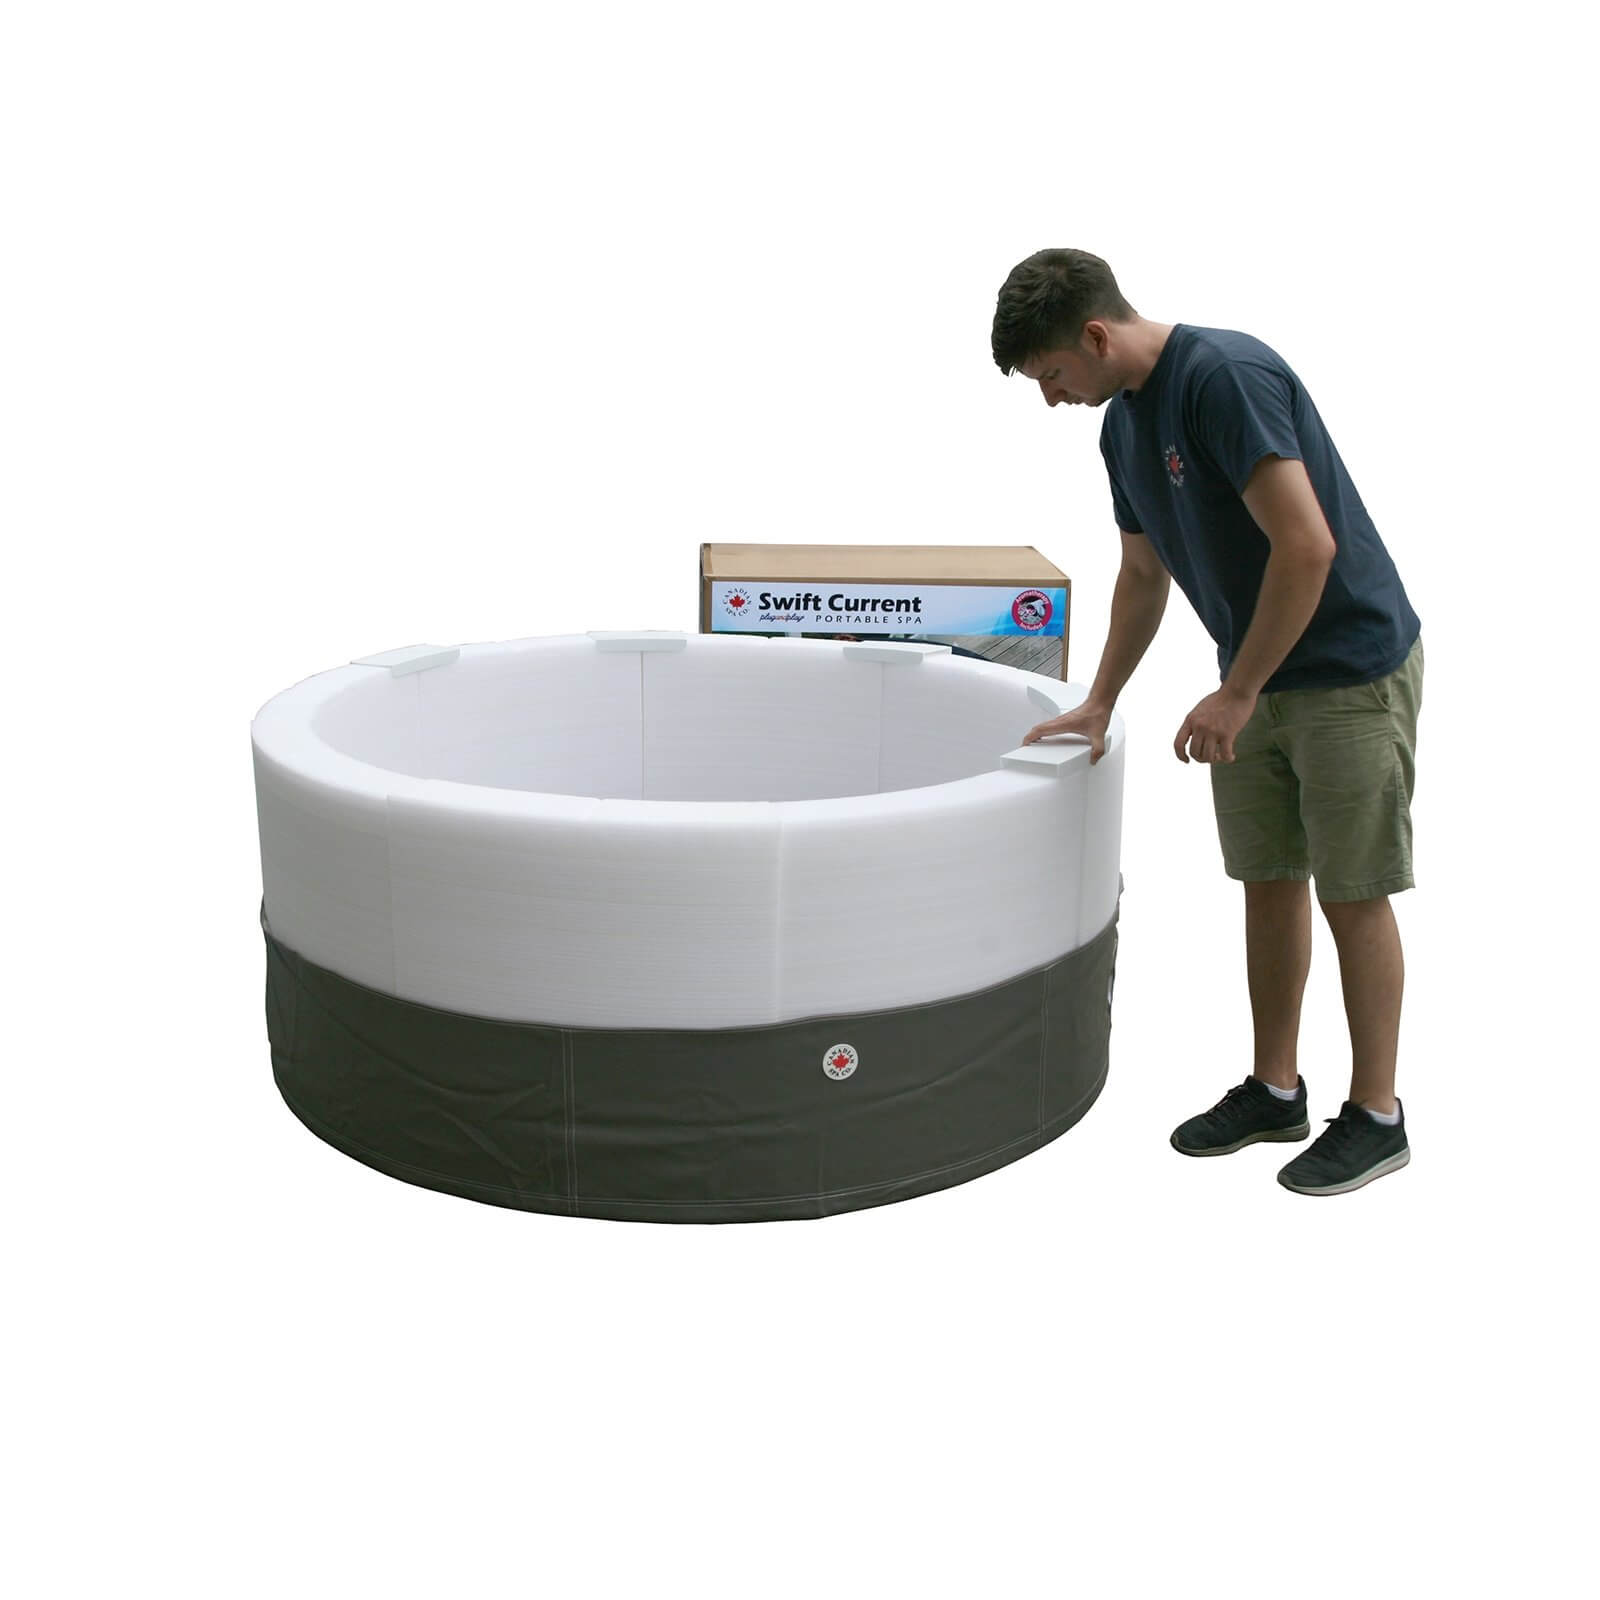 Swift Current 4-6 Hot Tub Version 2 by Canadian Spa (Includes Free Delivery)